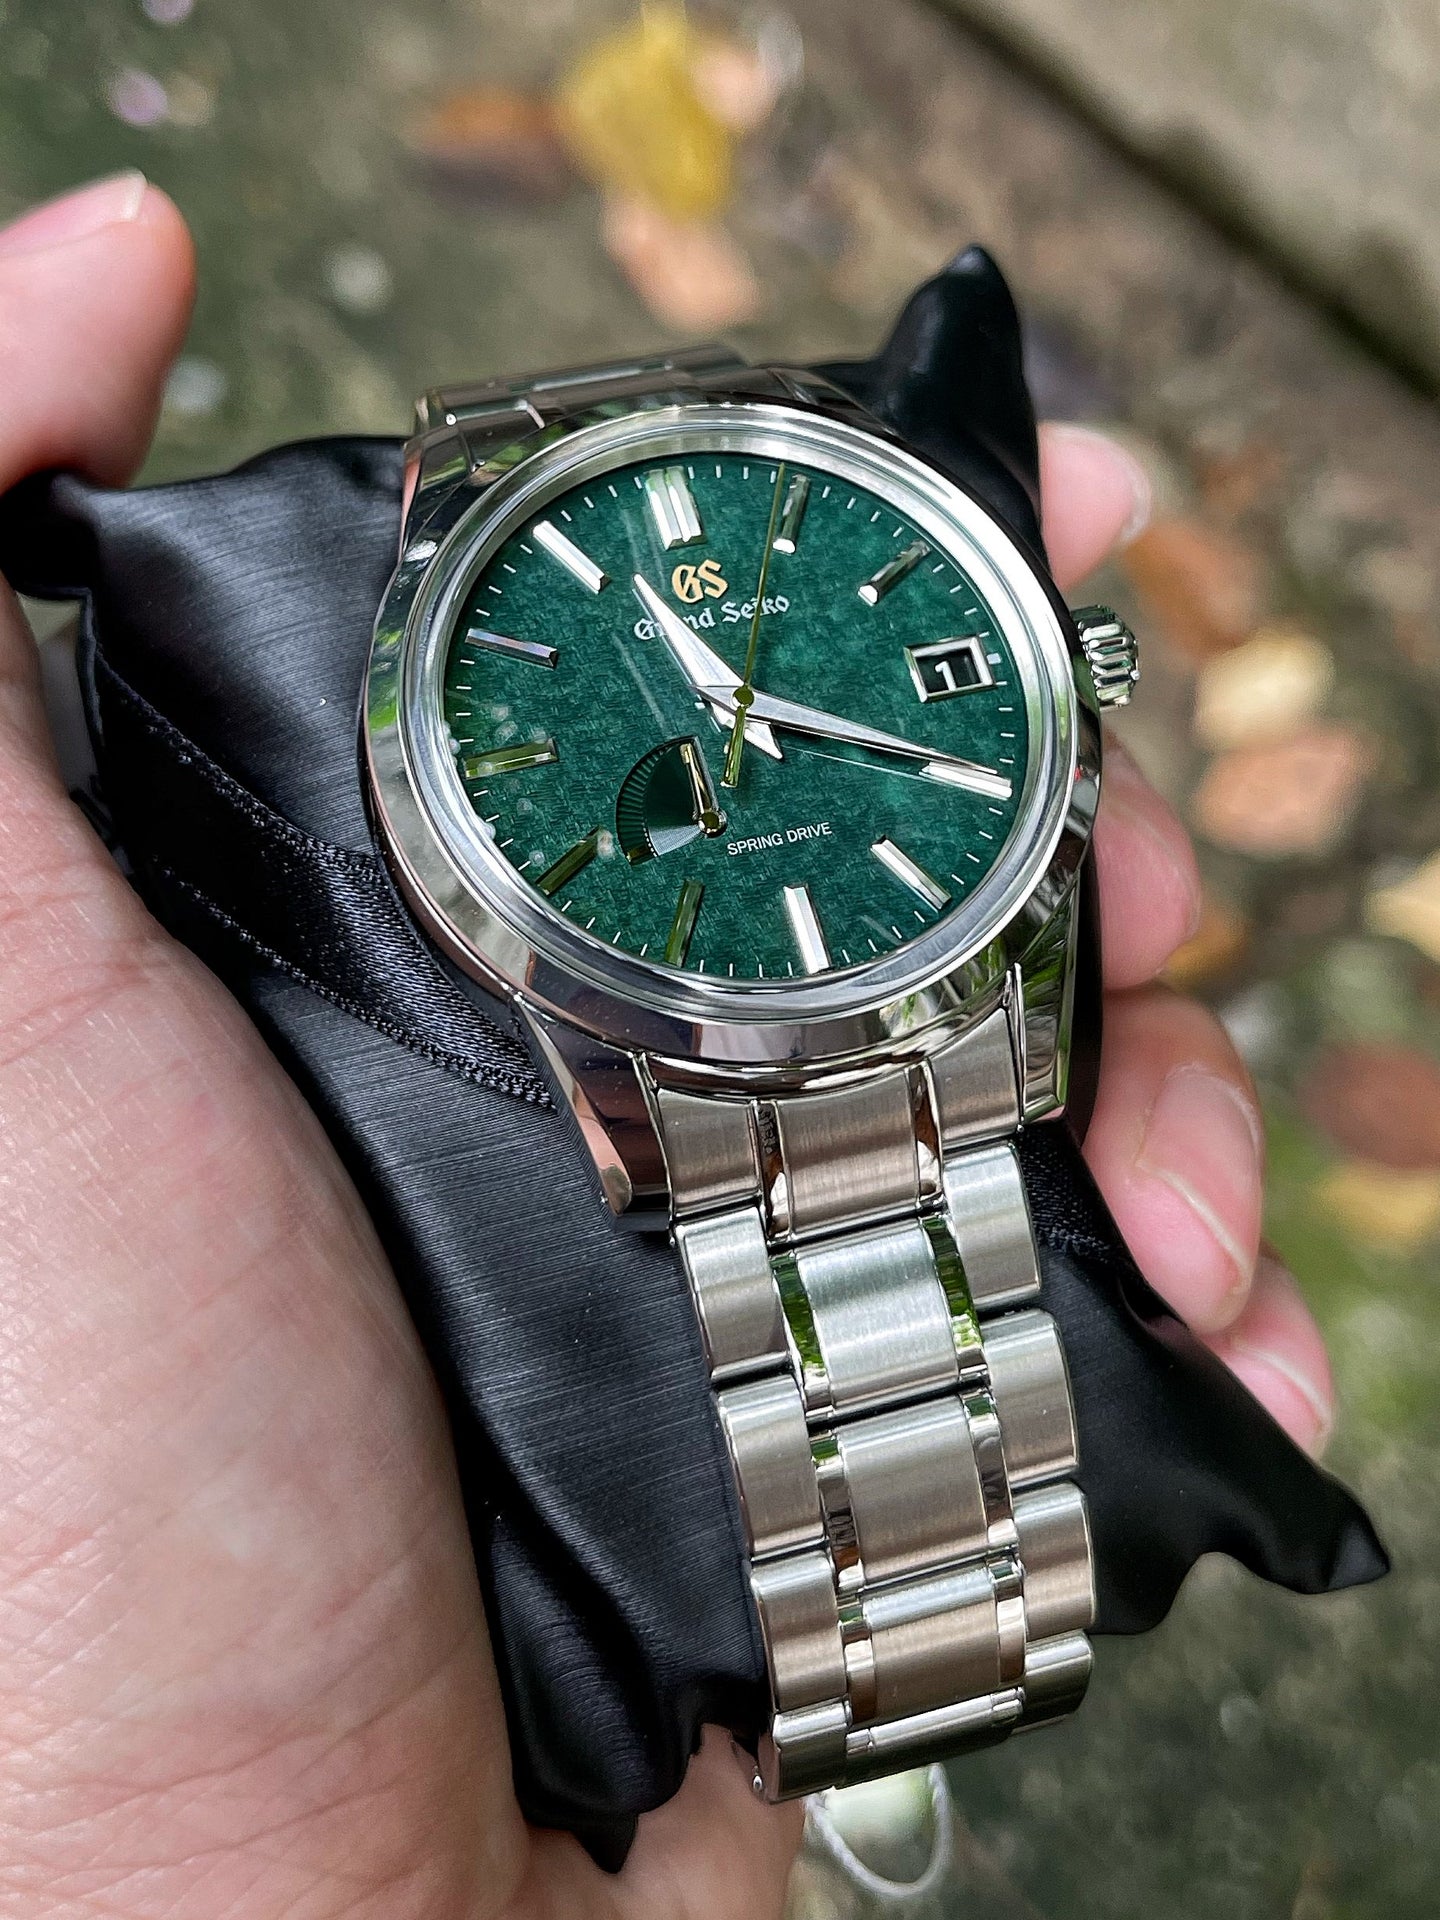 For sale) Grand Seiko Sbga453 - New 100% - Jade Snowflake - Limited for  China Market | WatchUSeek Watch Forums